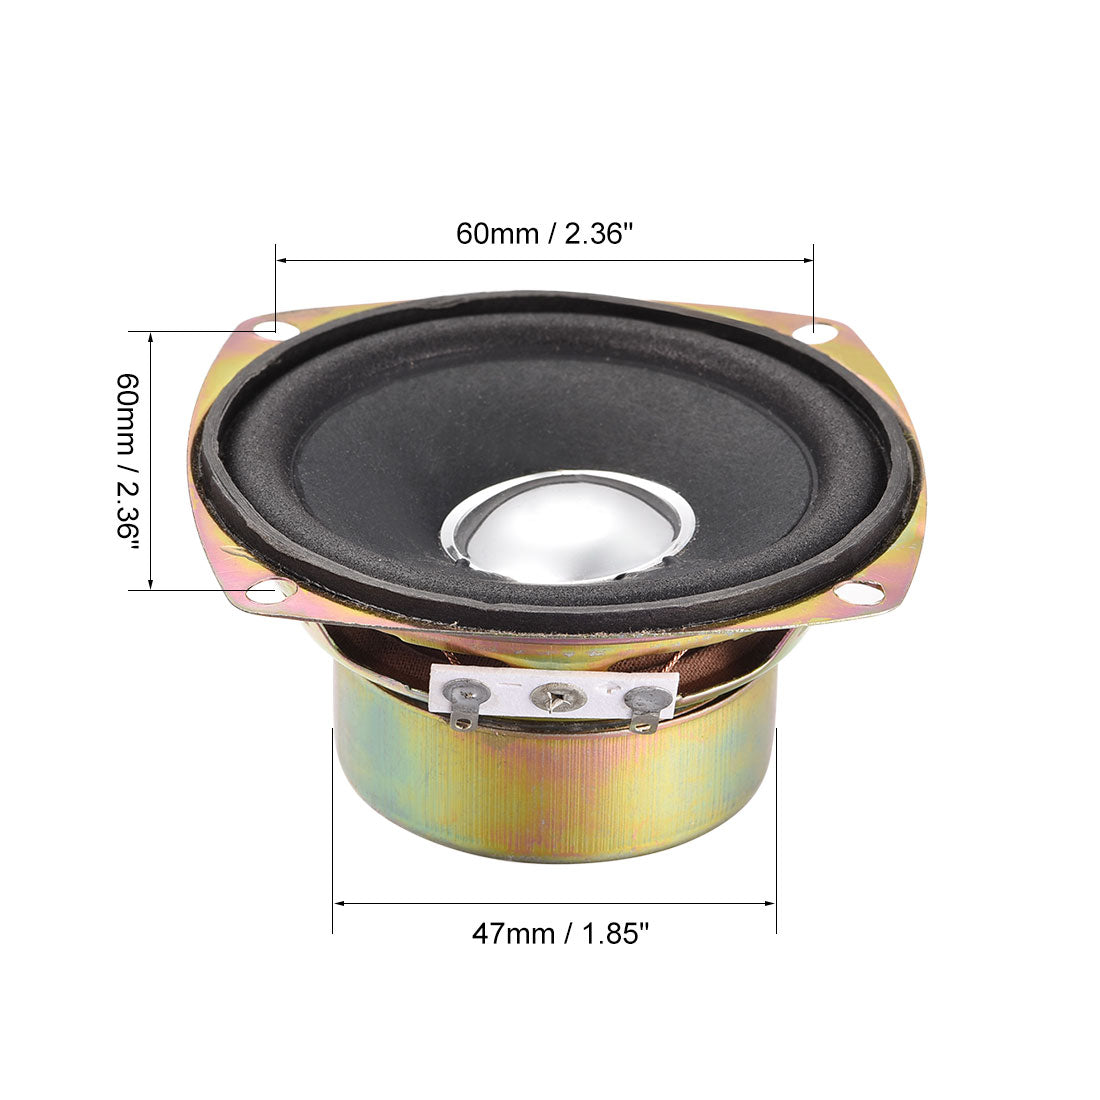 uxcell Uxcell 10W 4 Ohm 3 Inch 78x78x39mm Anti-magnetic Speaker Tweeter Speakers 2pcs